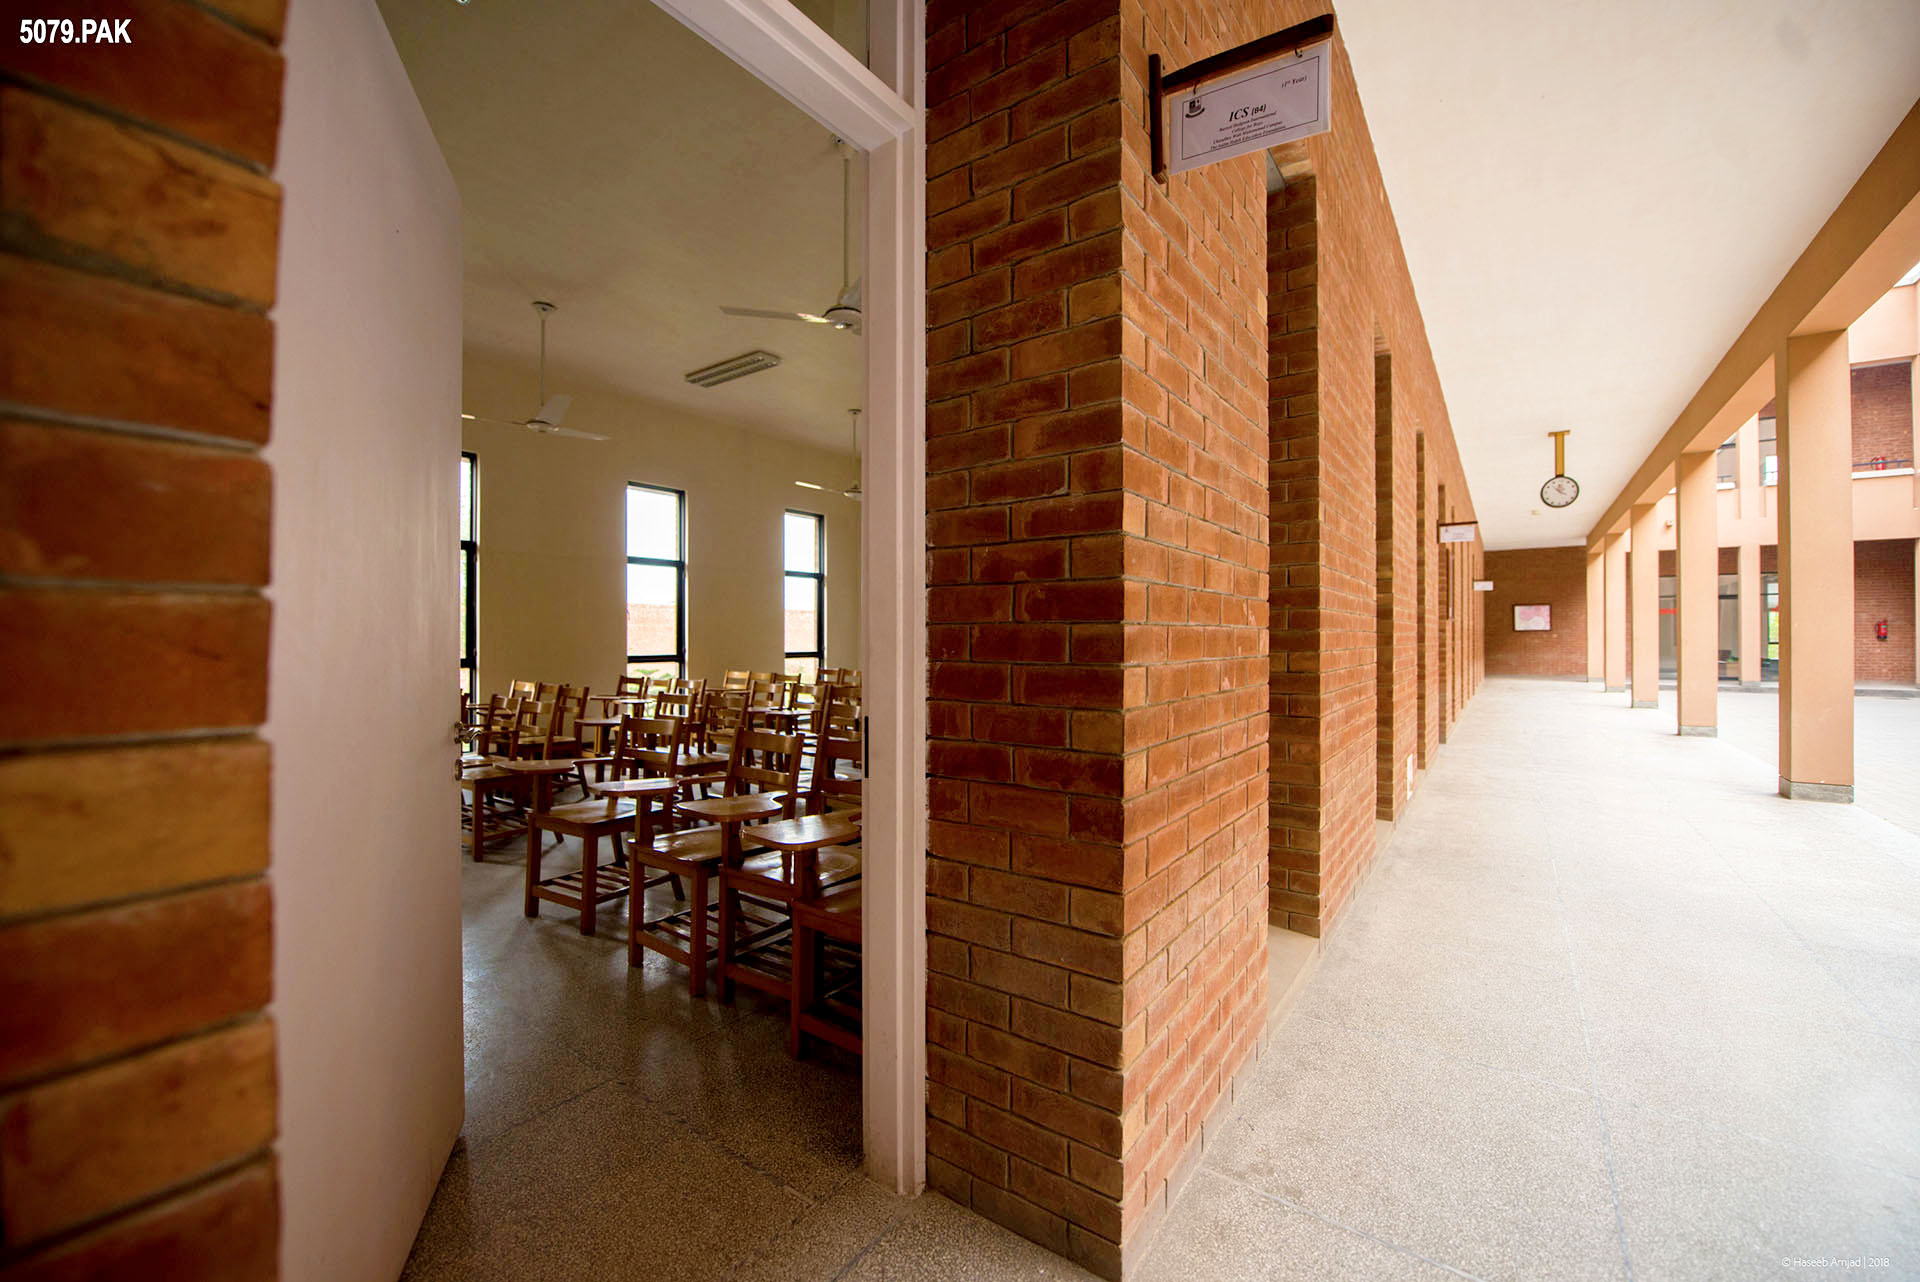 <p>One of the challenges for the architect was the requirement that the school must have strict segregation between the boys and girls, in keeping with local norms</p>